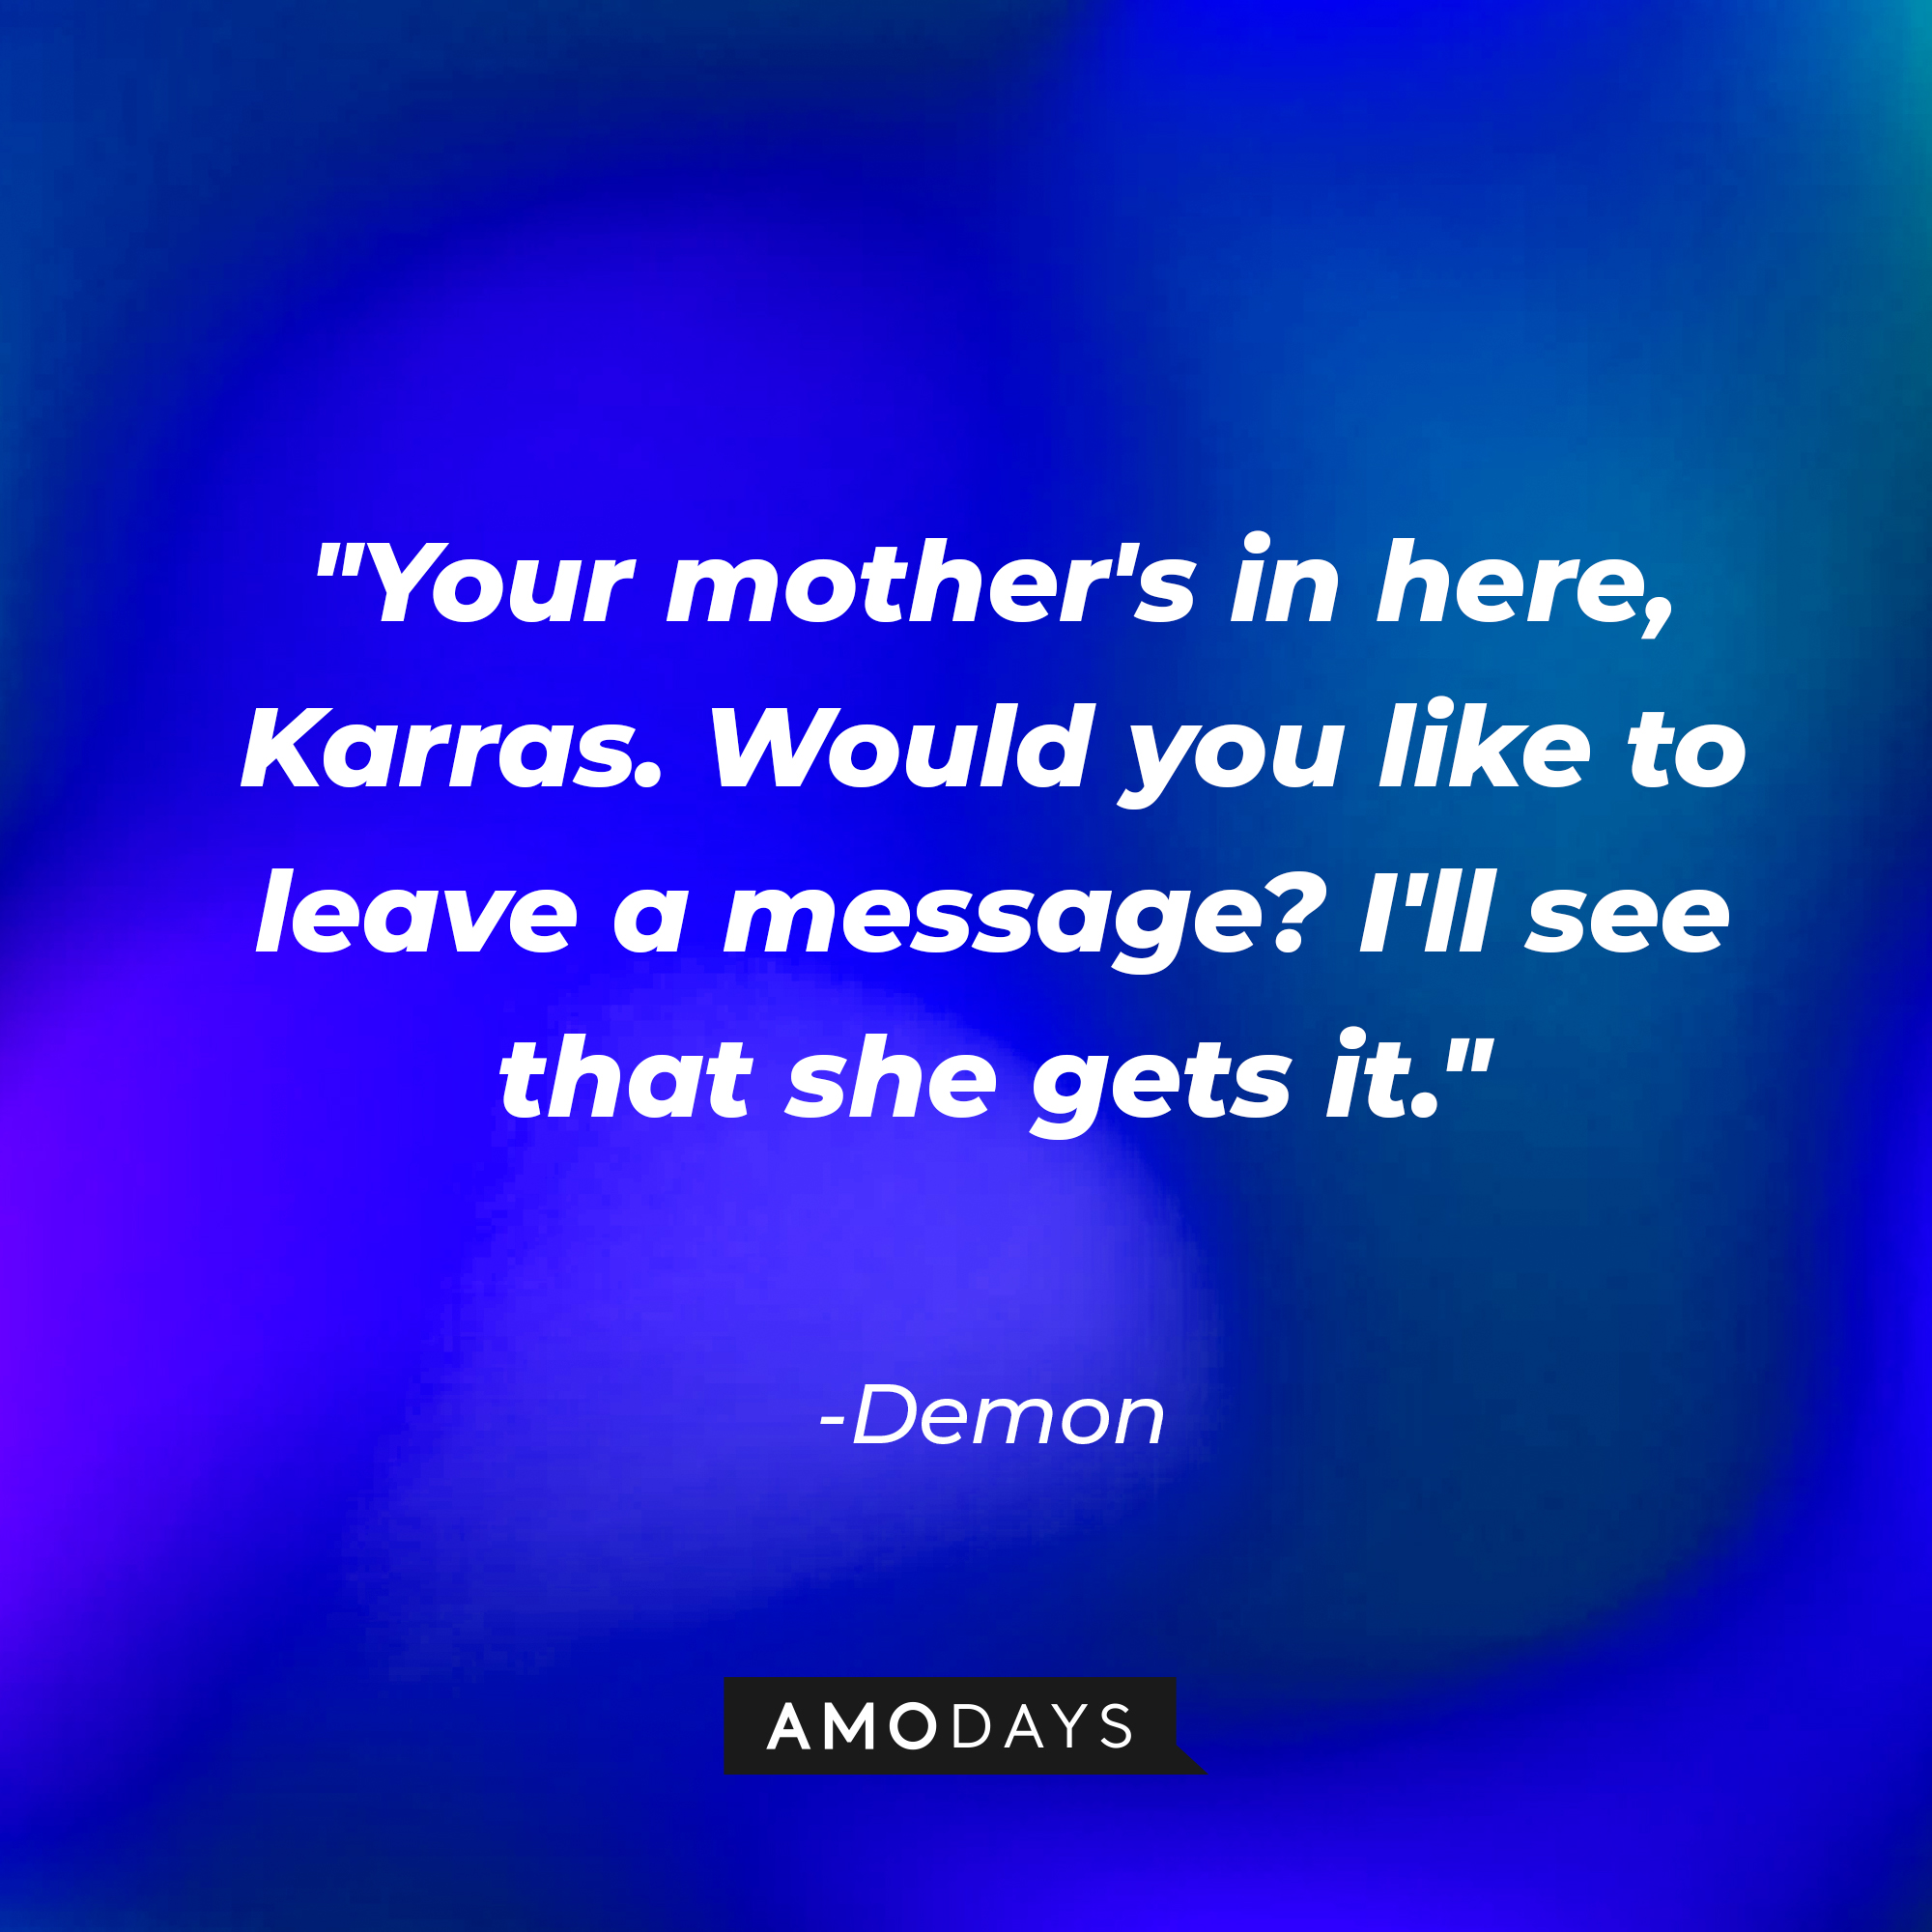 The Demon's quote: "Your mother's in here, Karras. Would you like to leave a message? I'll see that she gets it." | Source: AmoDAys